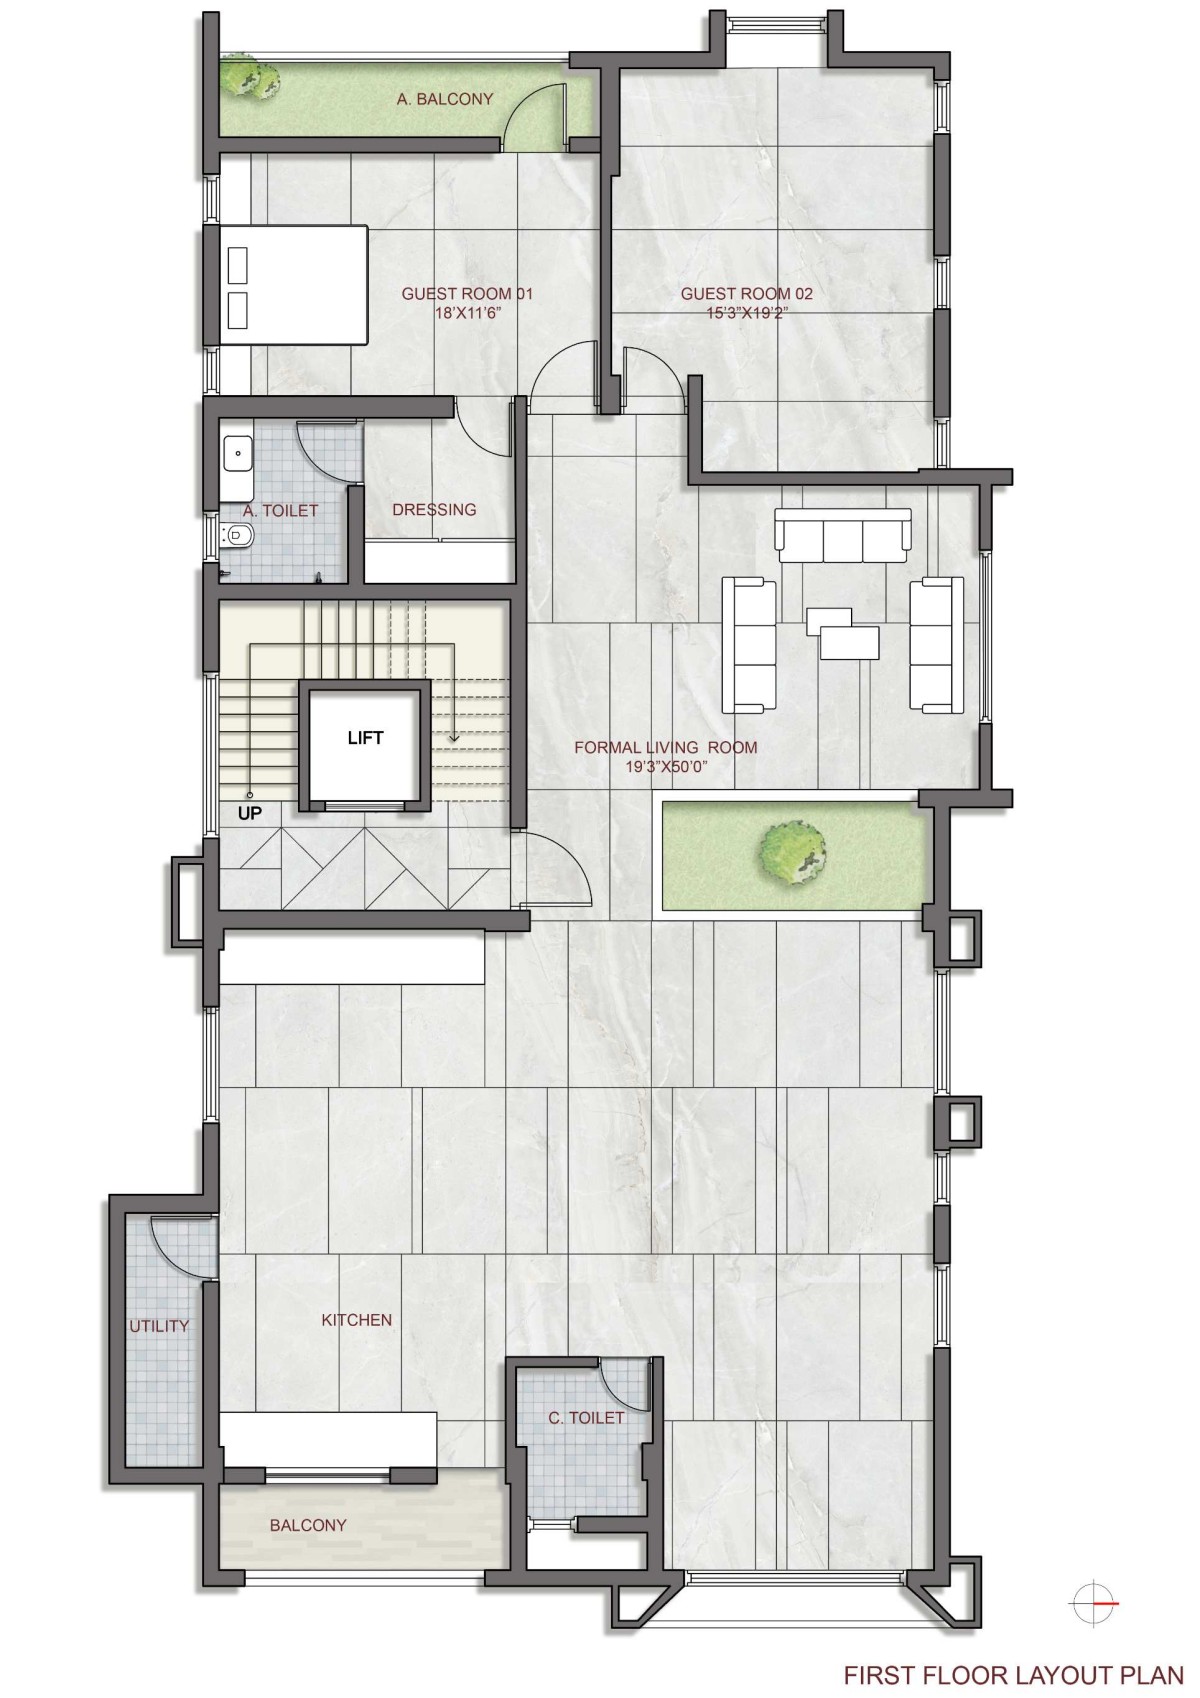 First Floor Plan of #15 Anantaya by Alaukik Architects